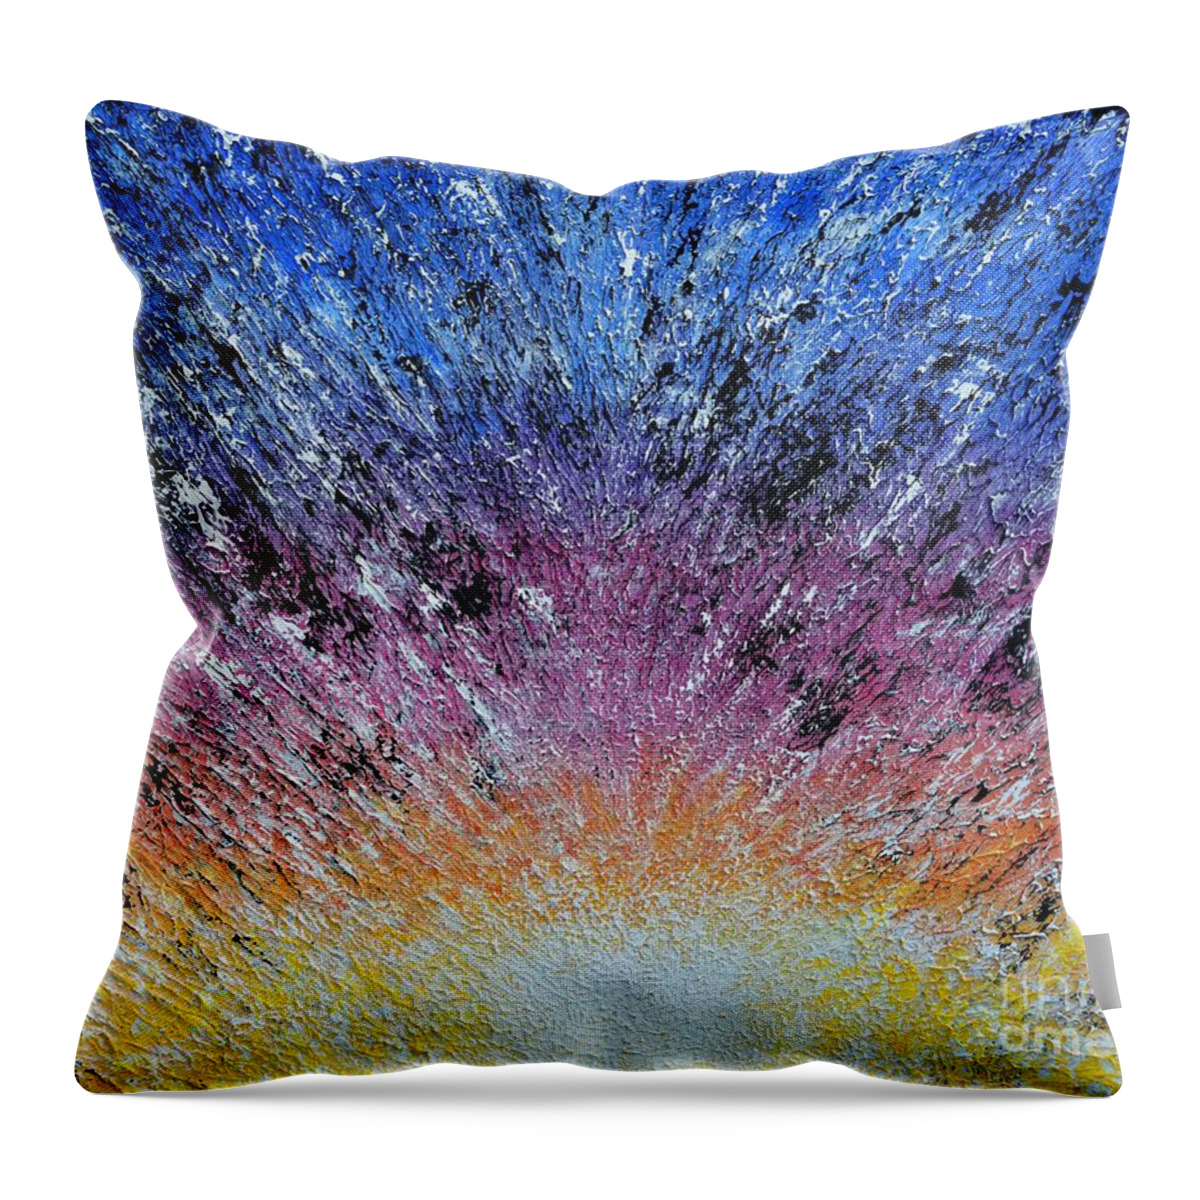 Music Throw Pillow featuring the painting Pride And Joy by Alys Caviness-Gober